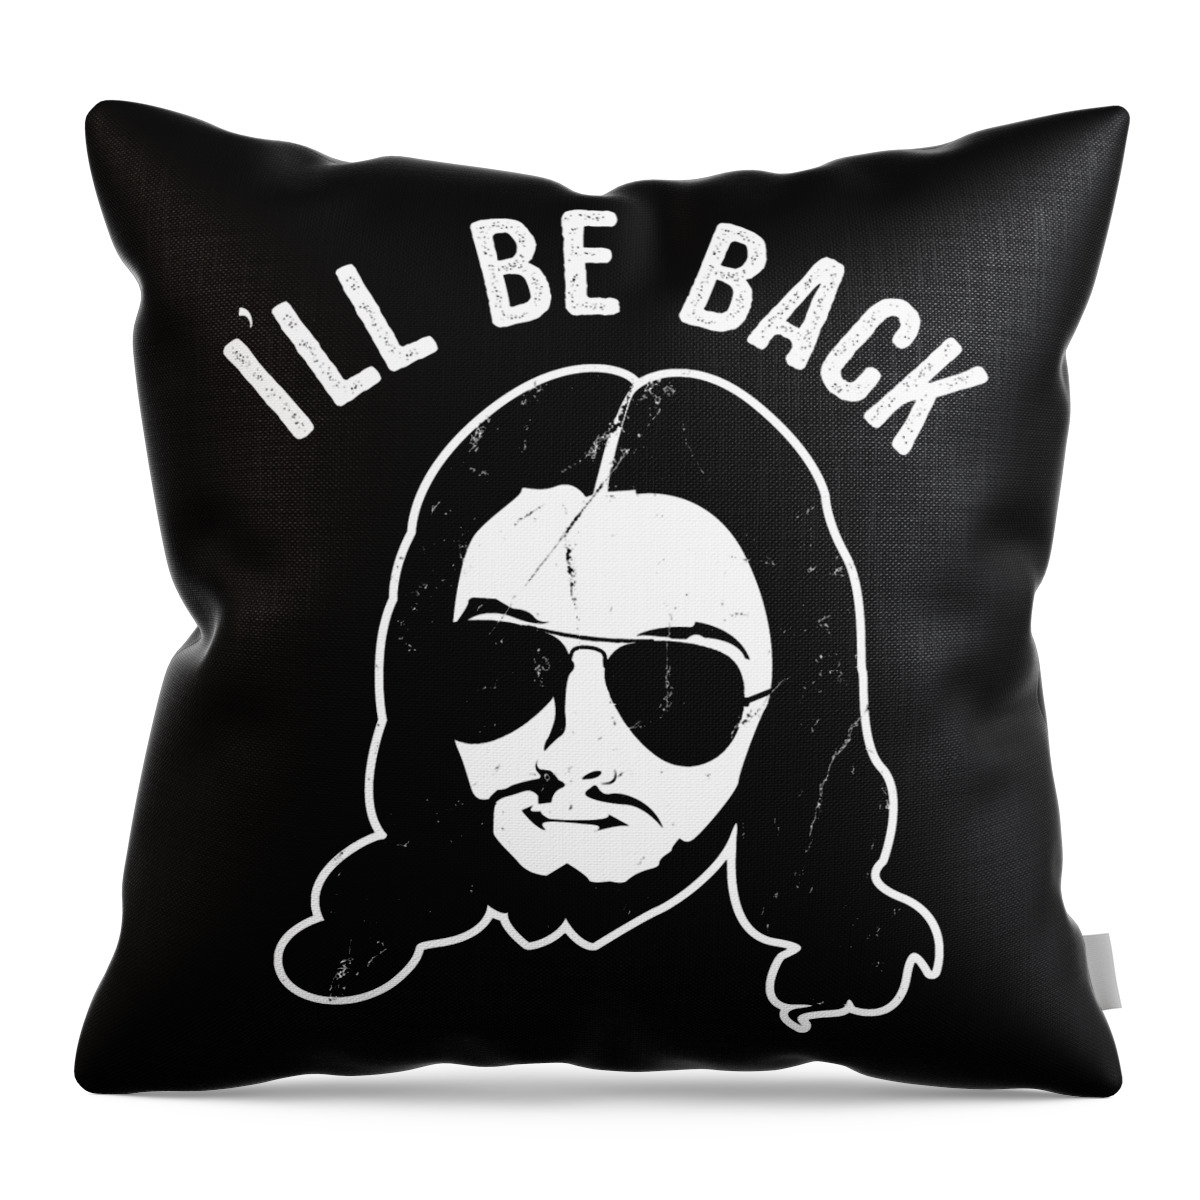 Funny Throw Pillow featuring the digital art Ill Be Back Jesus Coming by Flippin Sweet Gear